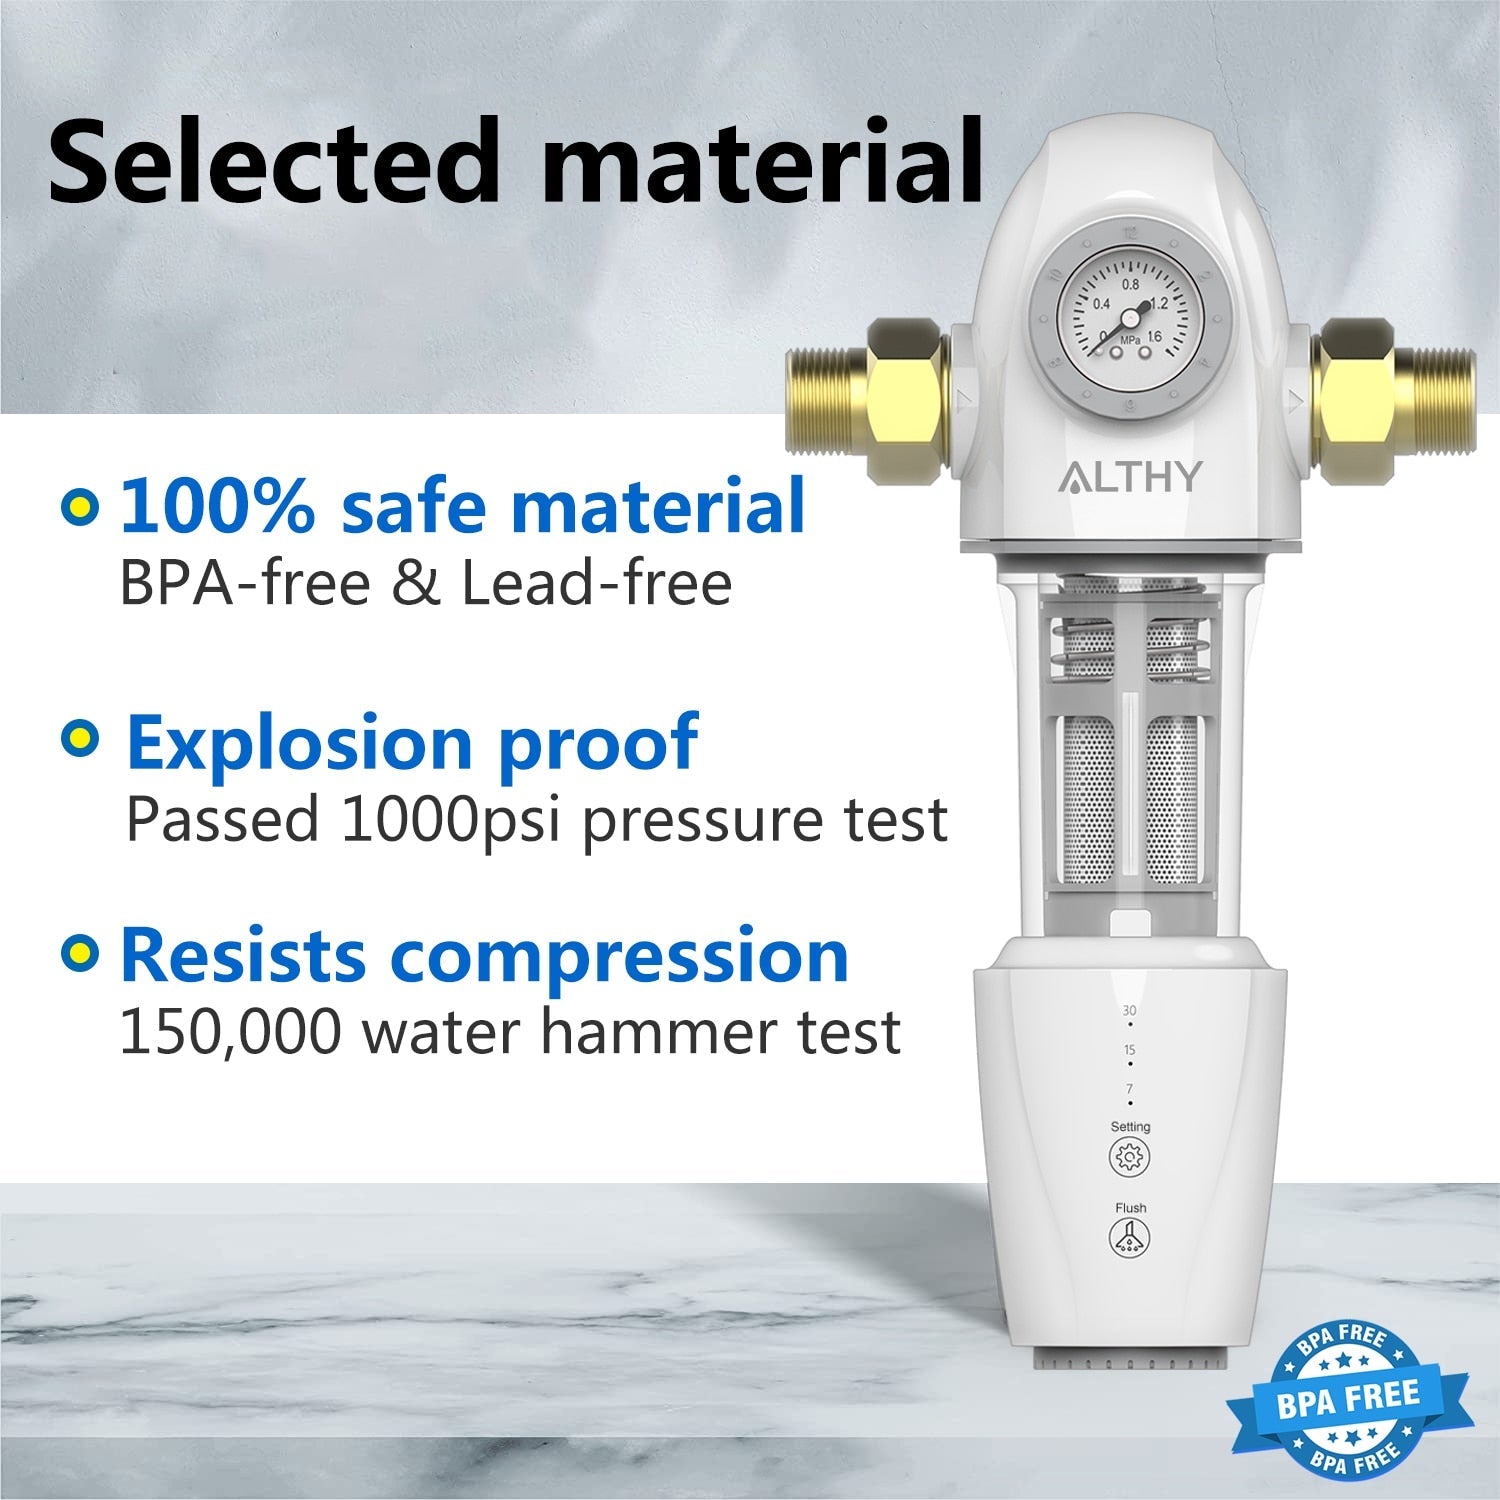 ALTHY PRE-AUTO2 Automatic Flushing Backwash Prefilter Spin Down Sediment Water Filter Central Whole House Purifier System  Hardware > Plumbing > Water Dispensing & Filtration 338.99 EZYSELLA SHOP